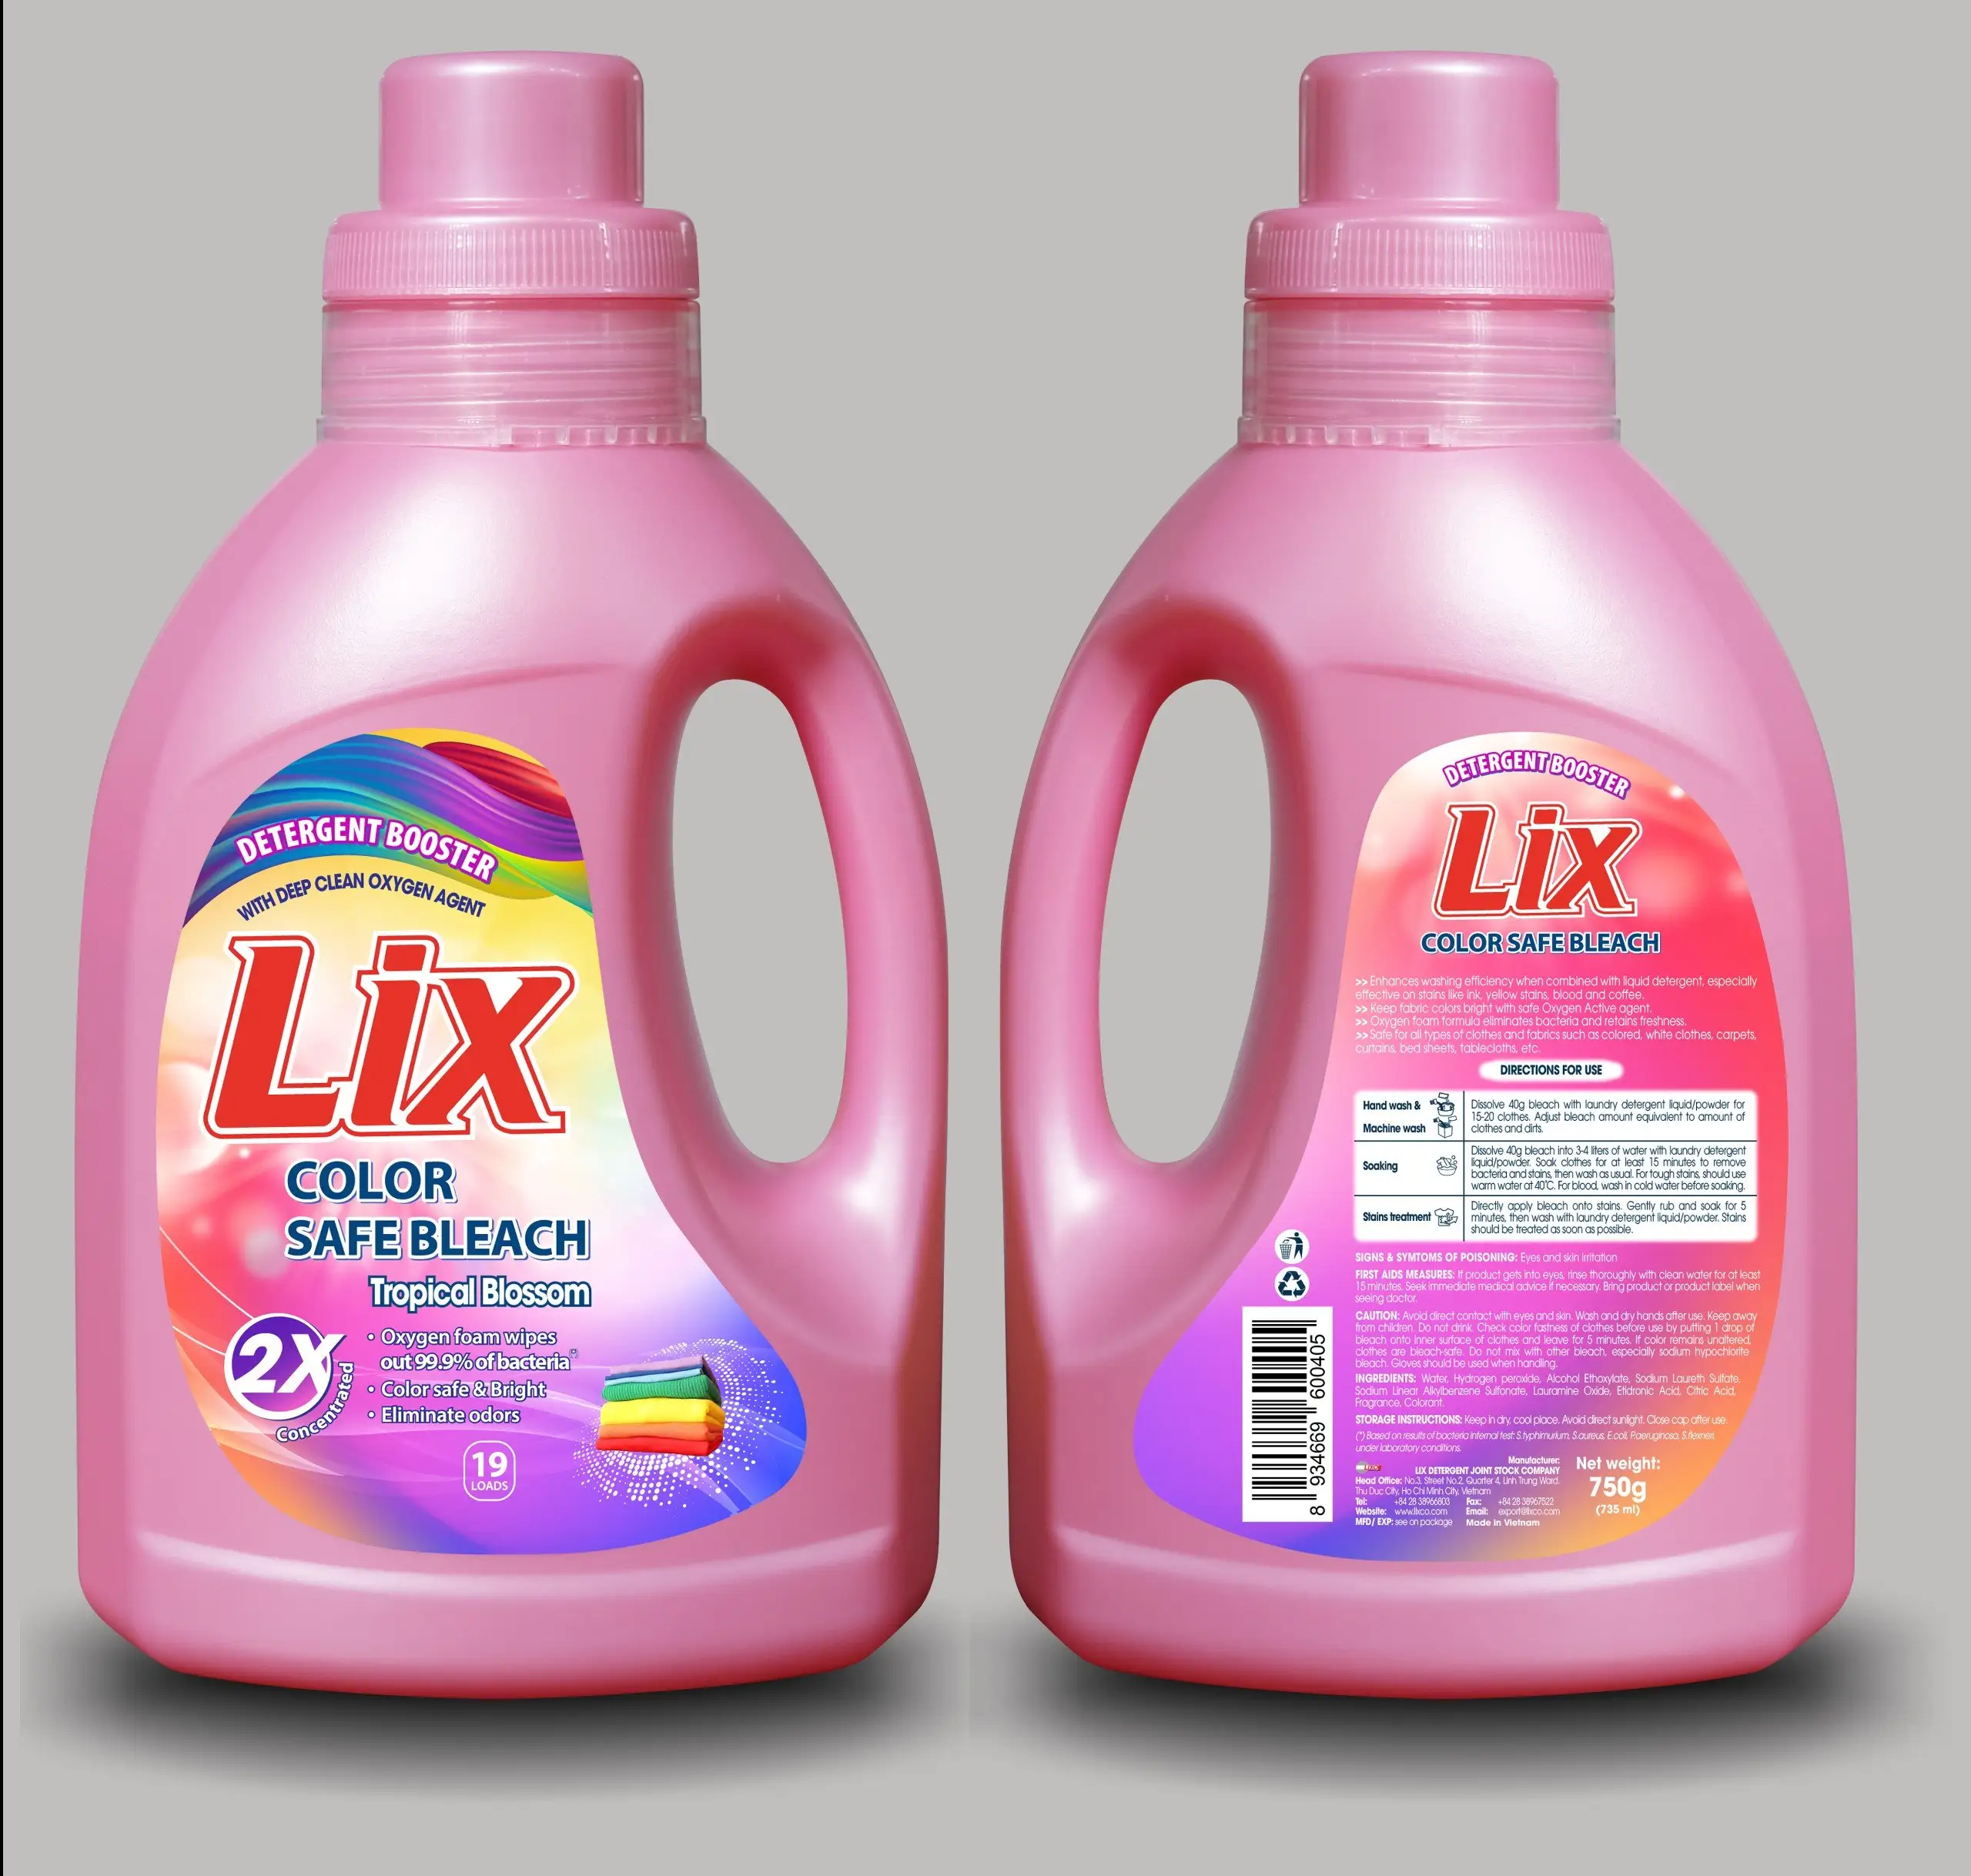 LIX COLOR SAFE BLEACH CLEANING/ JAVEL BLEACH FROM FACTORY IN VIETNAM